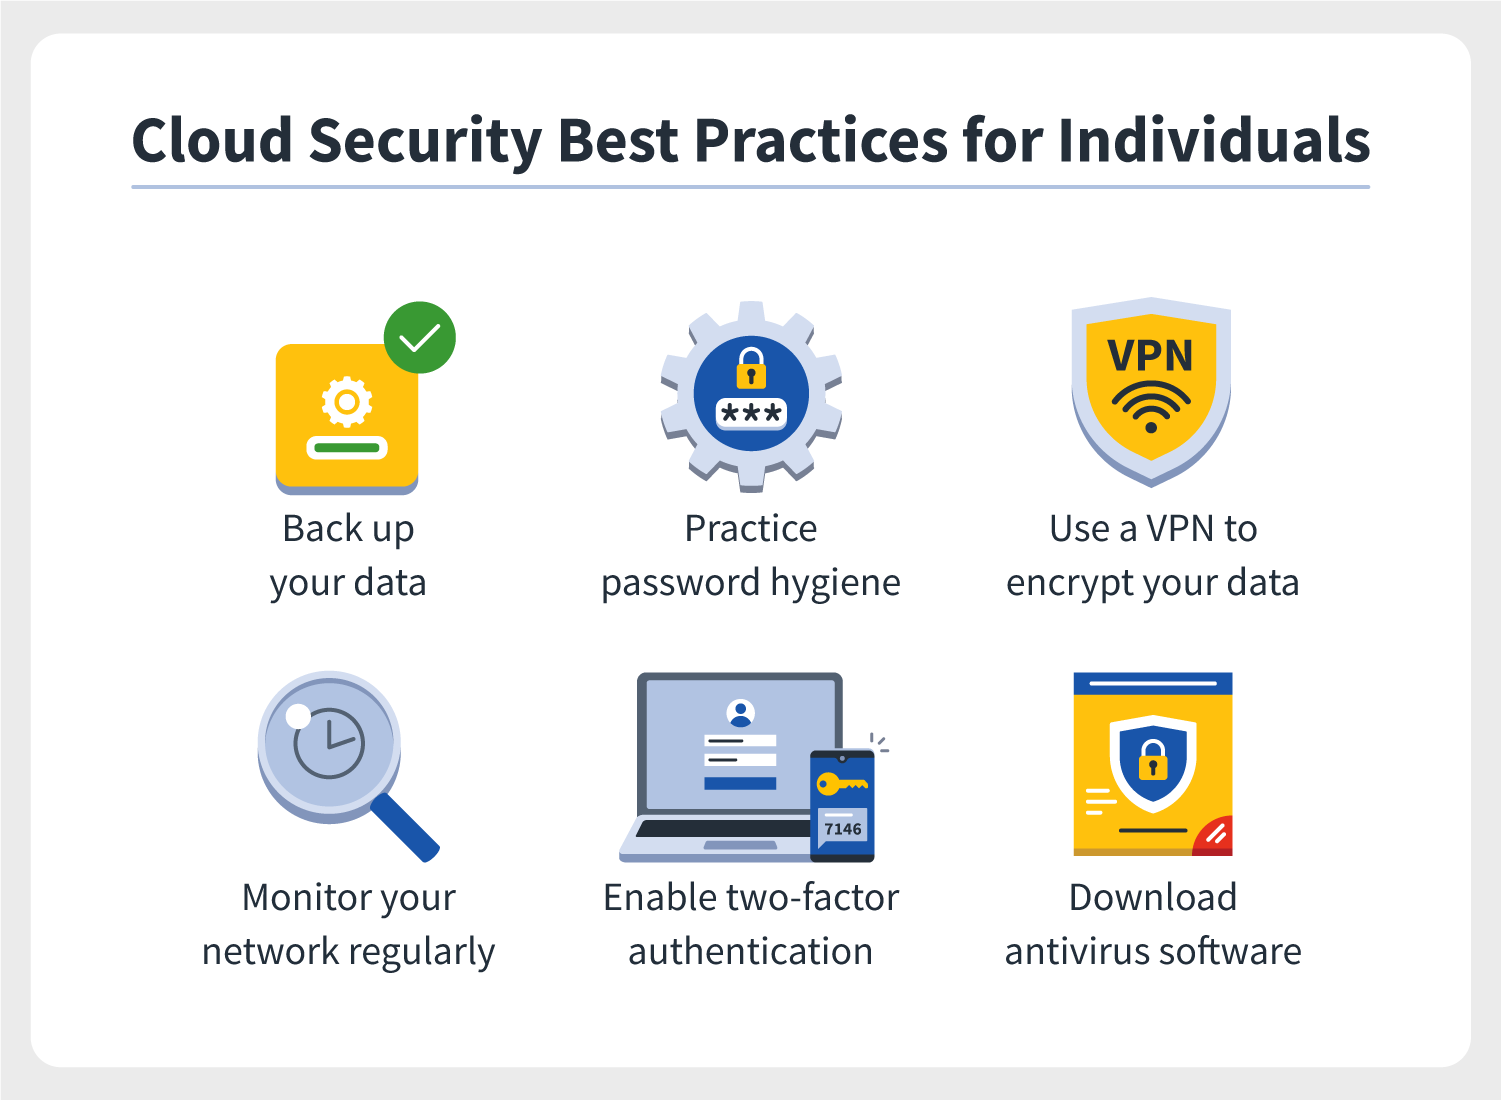 Six illustrations accompany cloud security best practices for individuals that can help with their defense against today’s cloud security threats.  